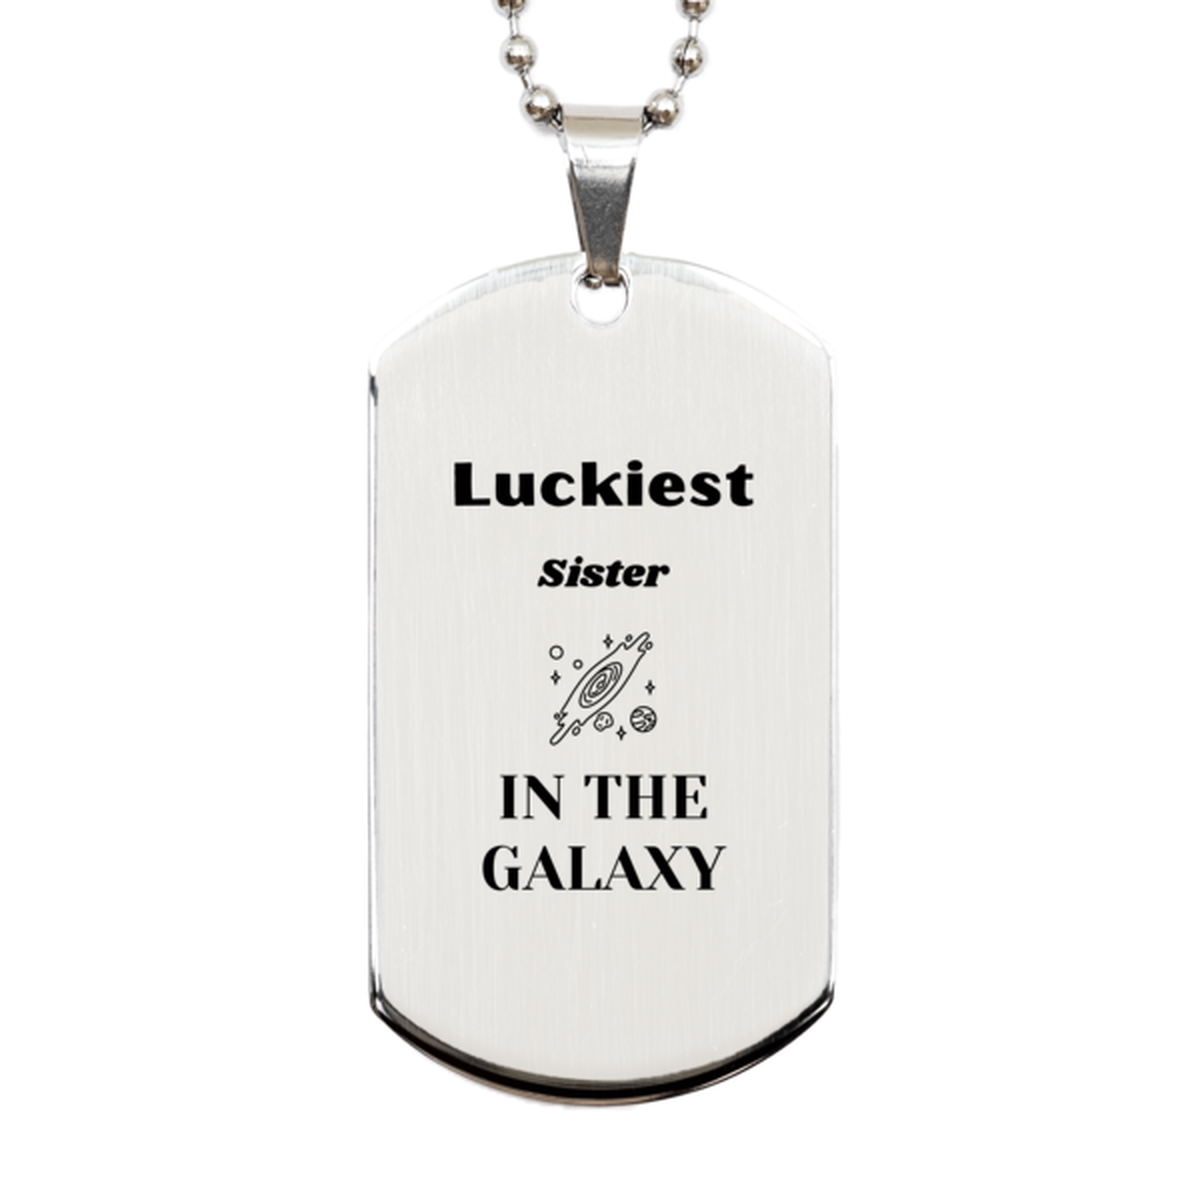 Luckiest Sister in the Galaxy, To My Sister Engraved Gifts, Christmas Sister Silver Dog Tag Gifts, X-mas Birthday Unique Gifts For Sister Men Women